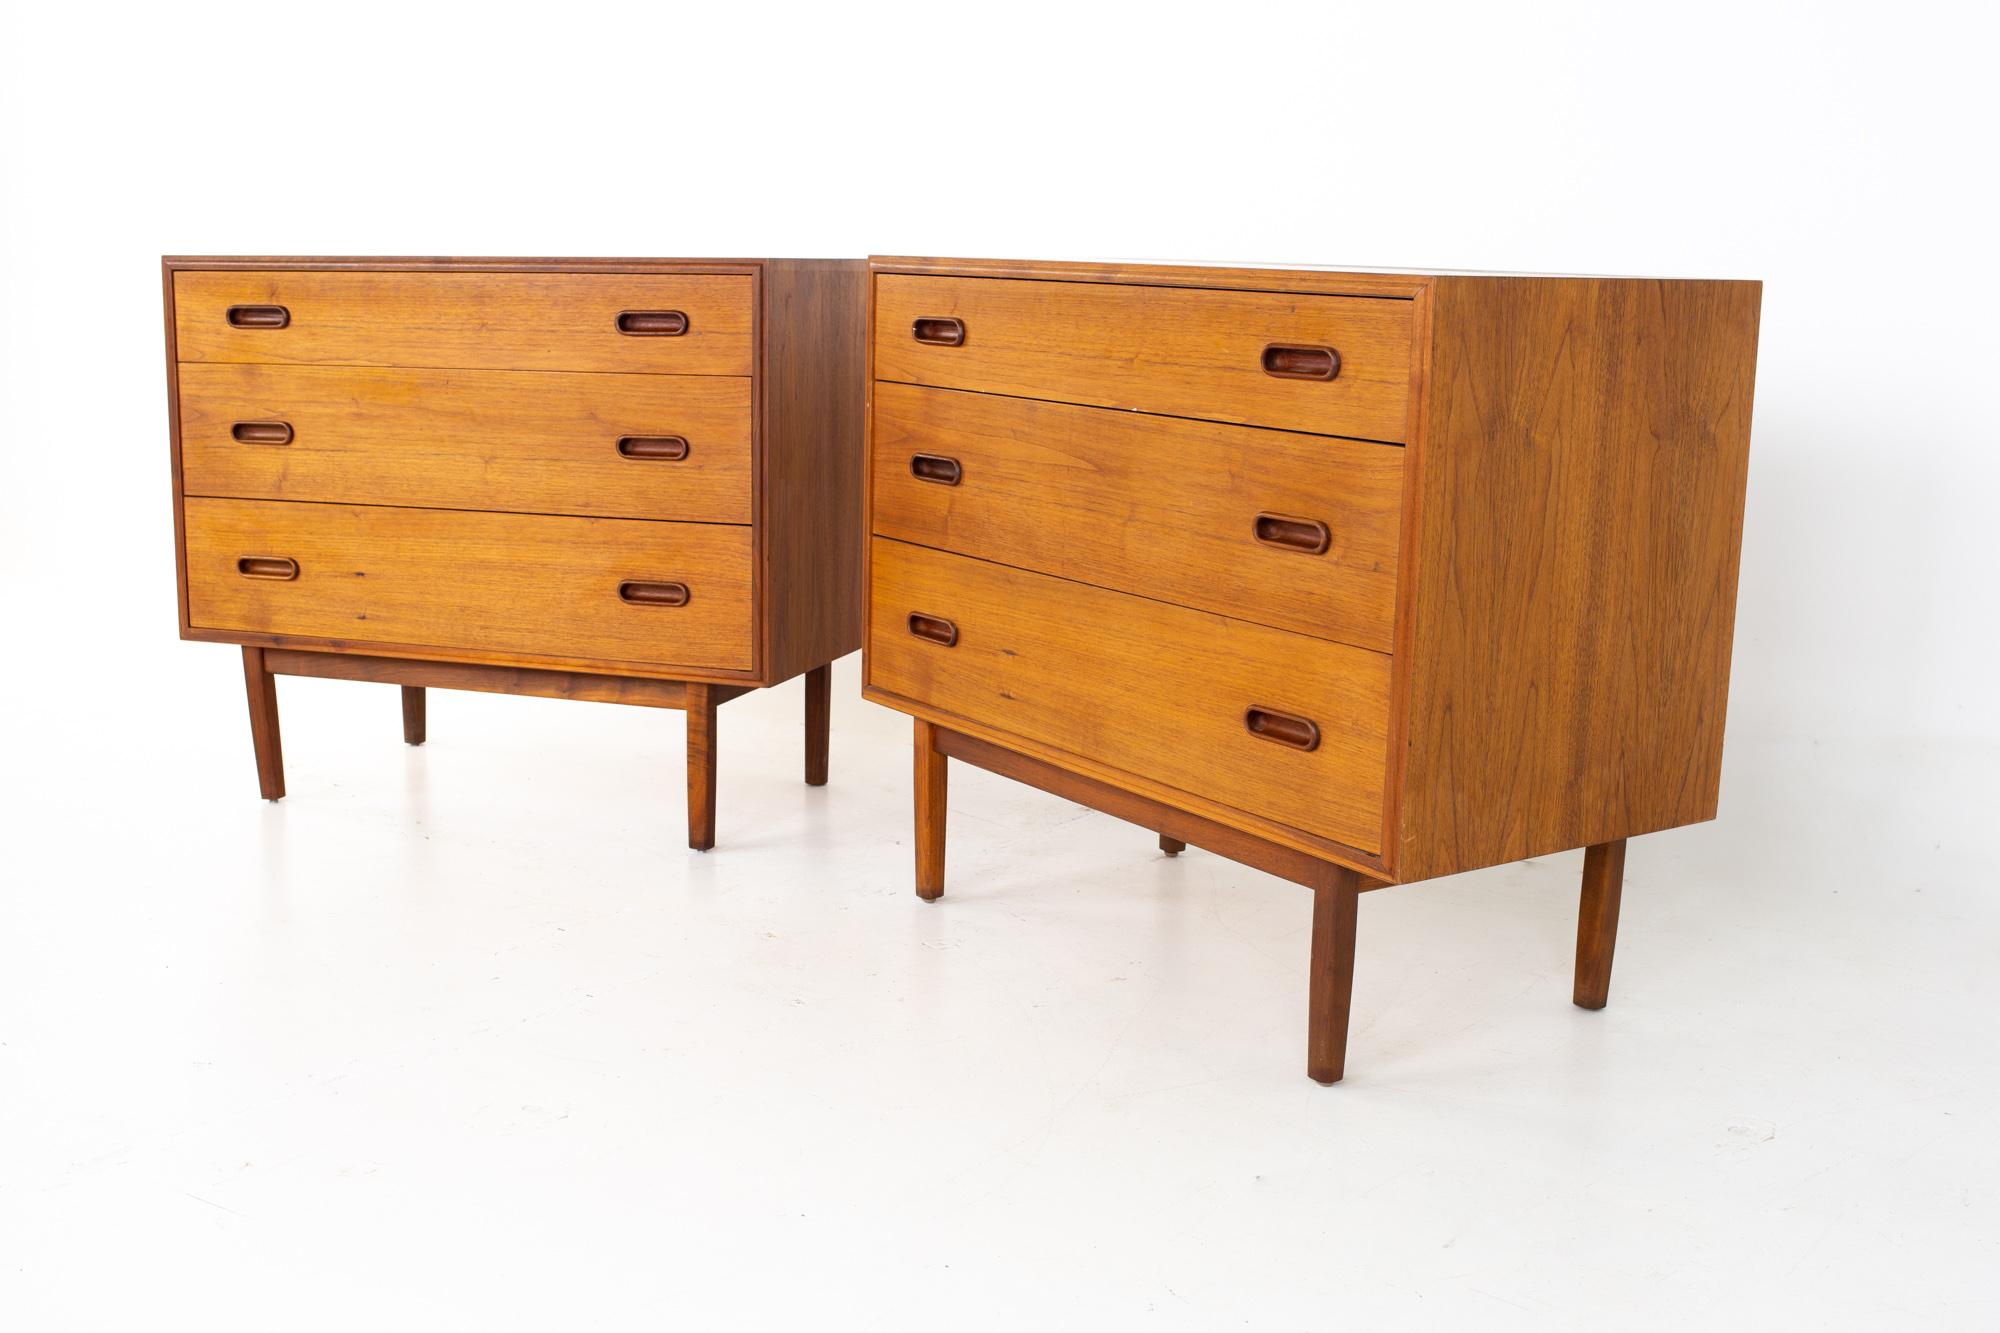 Jack Cartwright for founders mid century 3 drawer dresser chests - a pair.
Each chest measures: 36 wide x 18 deep x 30.5 inches high

All pieces of furniture can be had in what we call restored vintage condition. That means the piece is restored